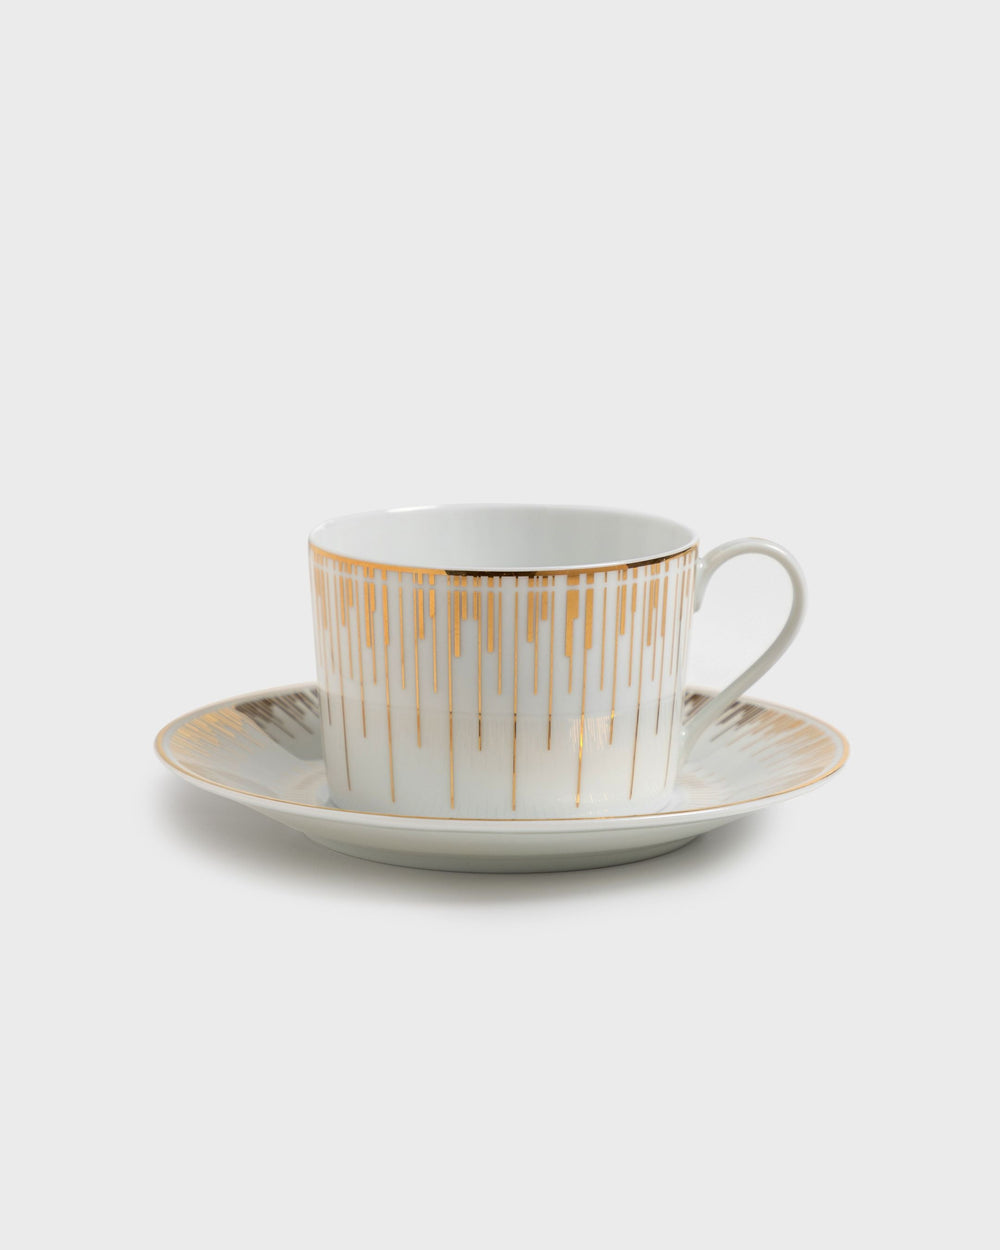 Tania Bulhoes Tea Cup and Saucer Astro